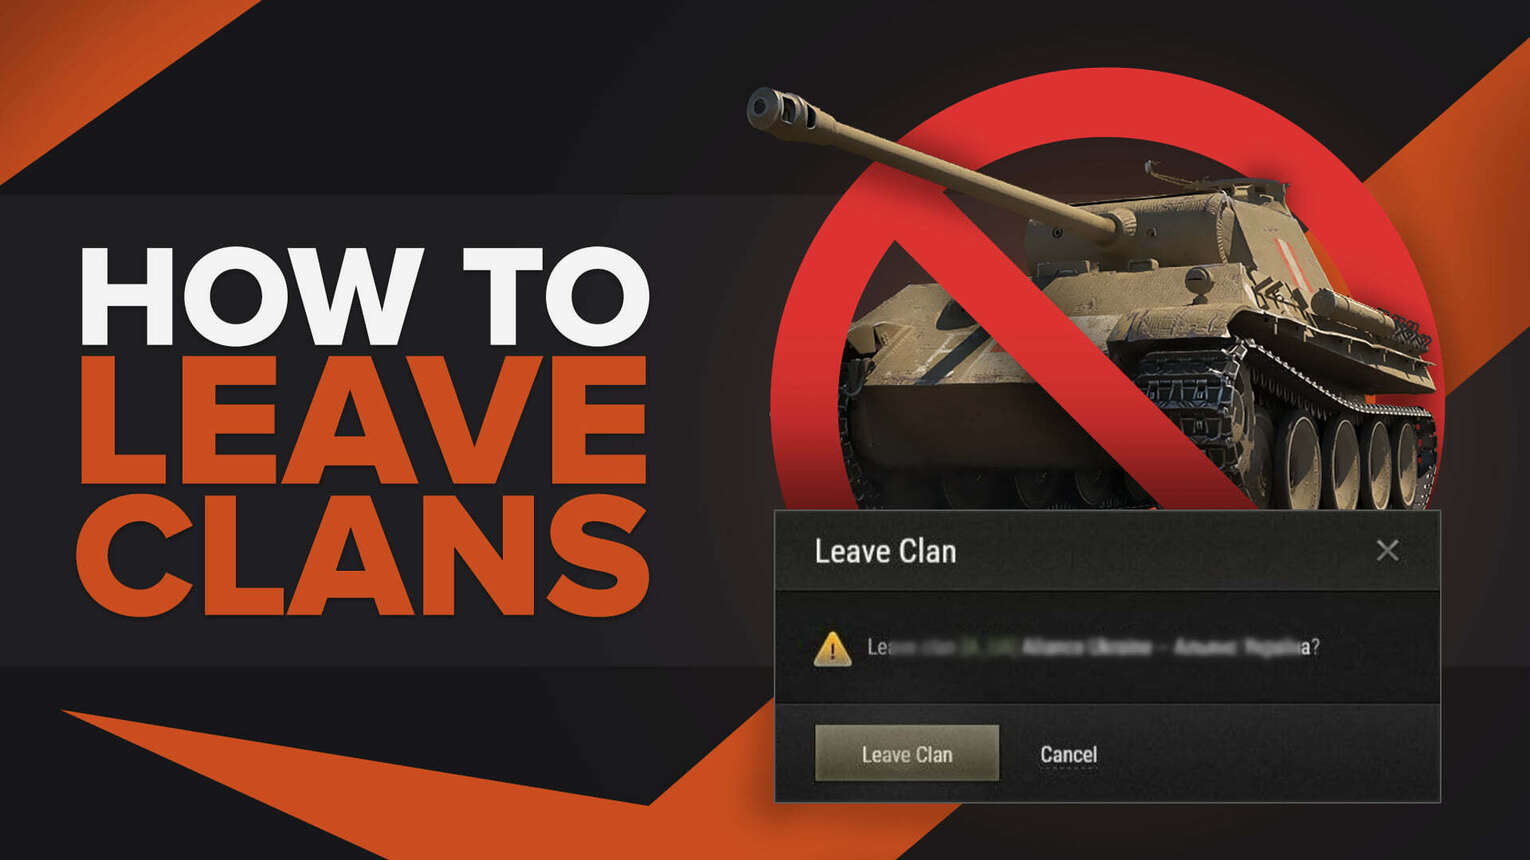 How To Leave A Clan In World of Tanks